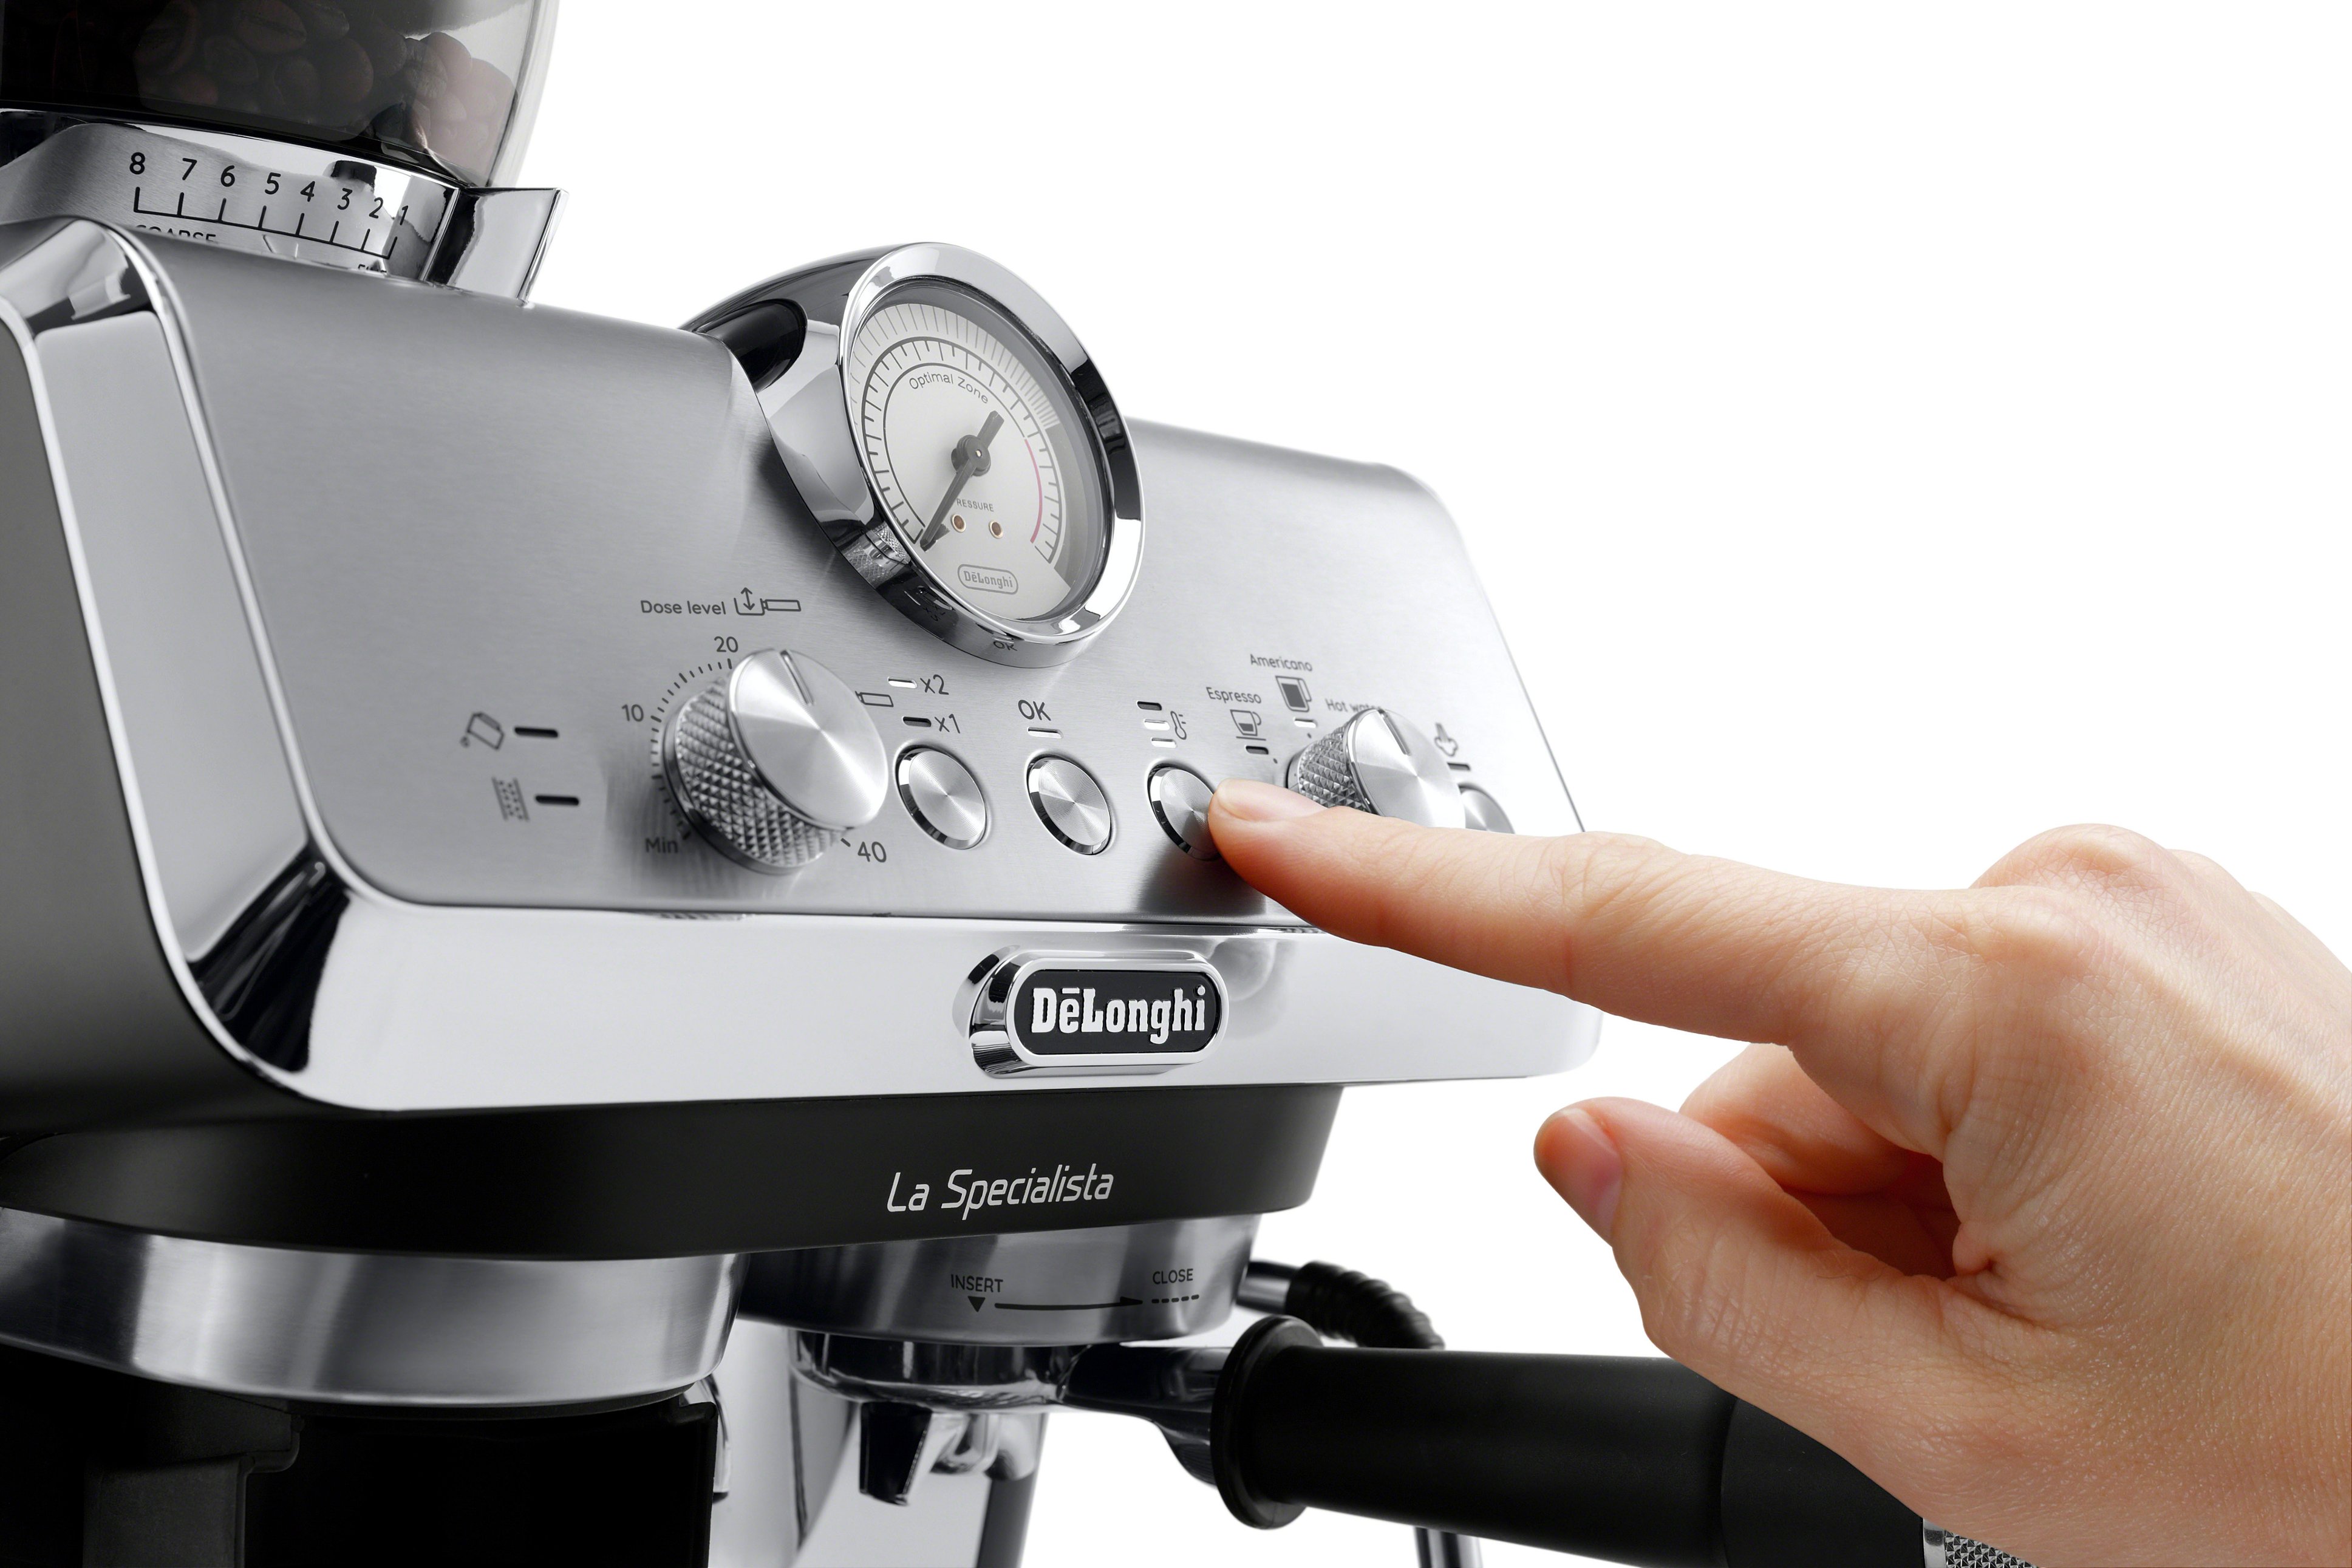  De'Longhi La Specialista Espresso Machine with Grinder, Milk  Frother, 1450W, Barista Kit - Bean to Cup Coffee & Cappuccino Maker: Home &  Kitchen